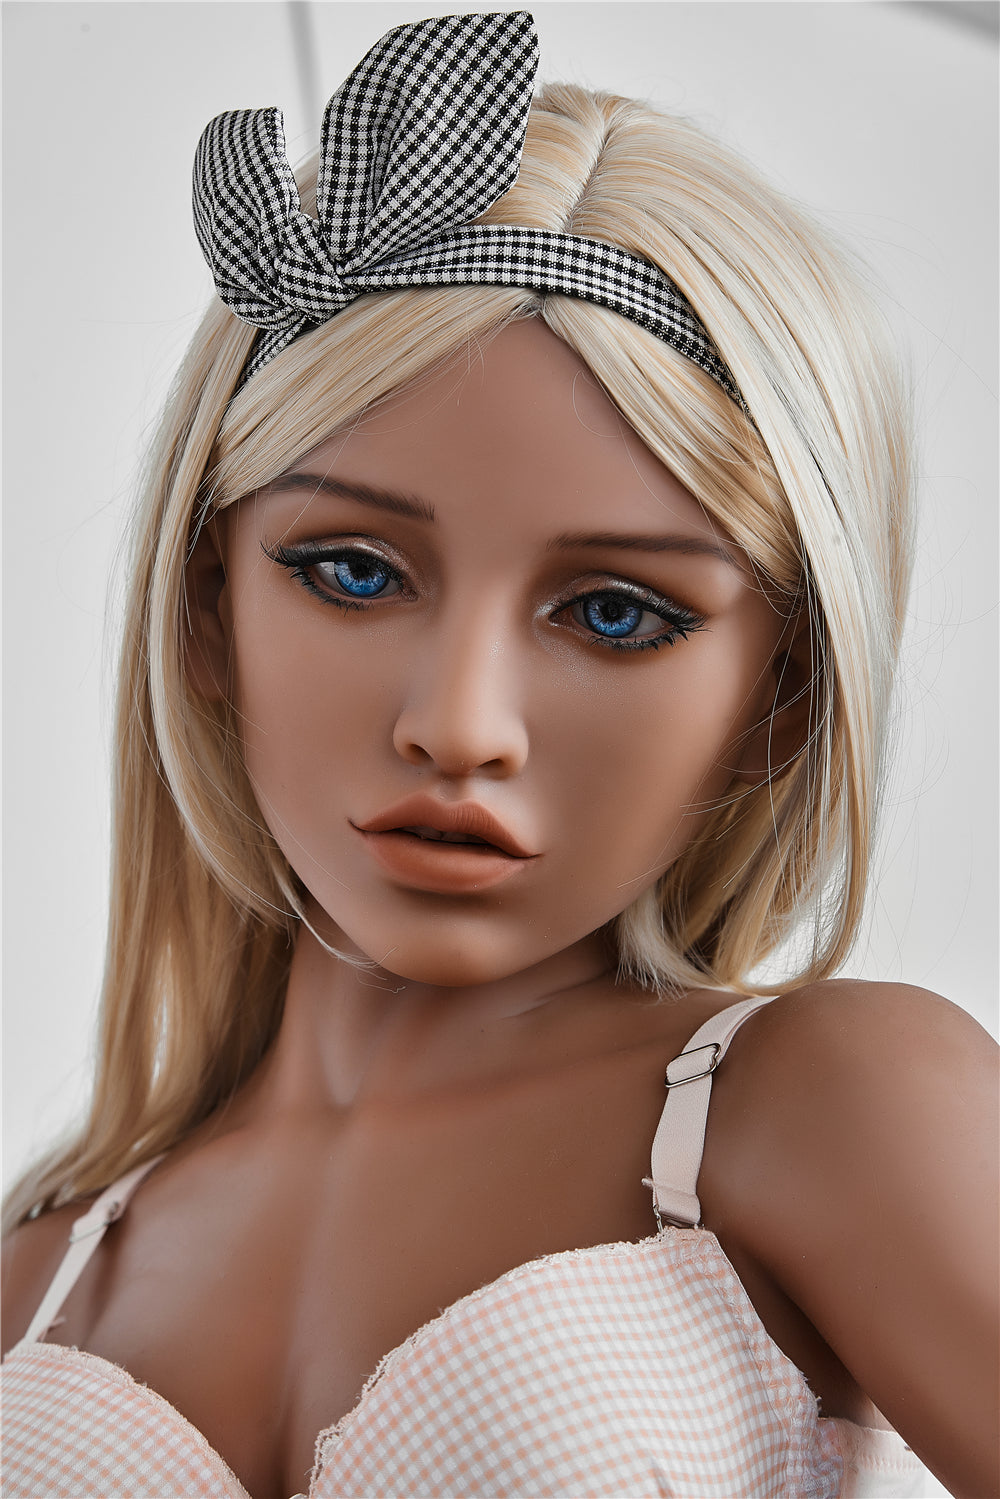 US Stock - Irontechdoll Victoria 150cm #50 Head Small Boobs Adult Love Doll TPE Sex Doll